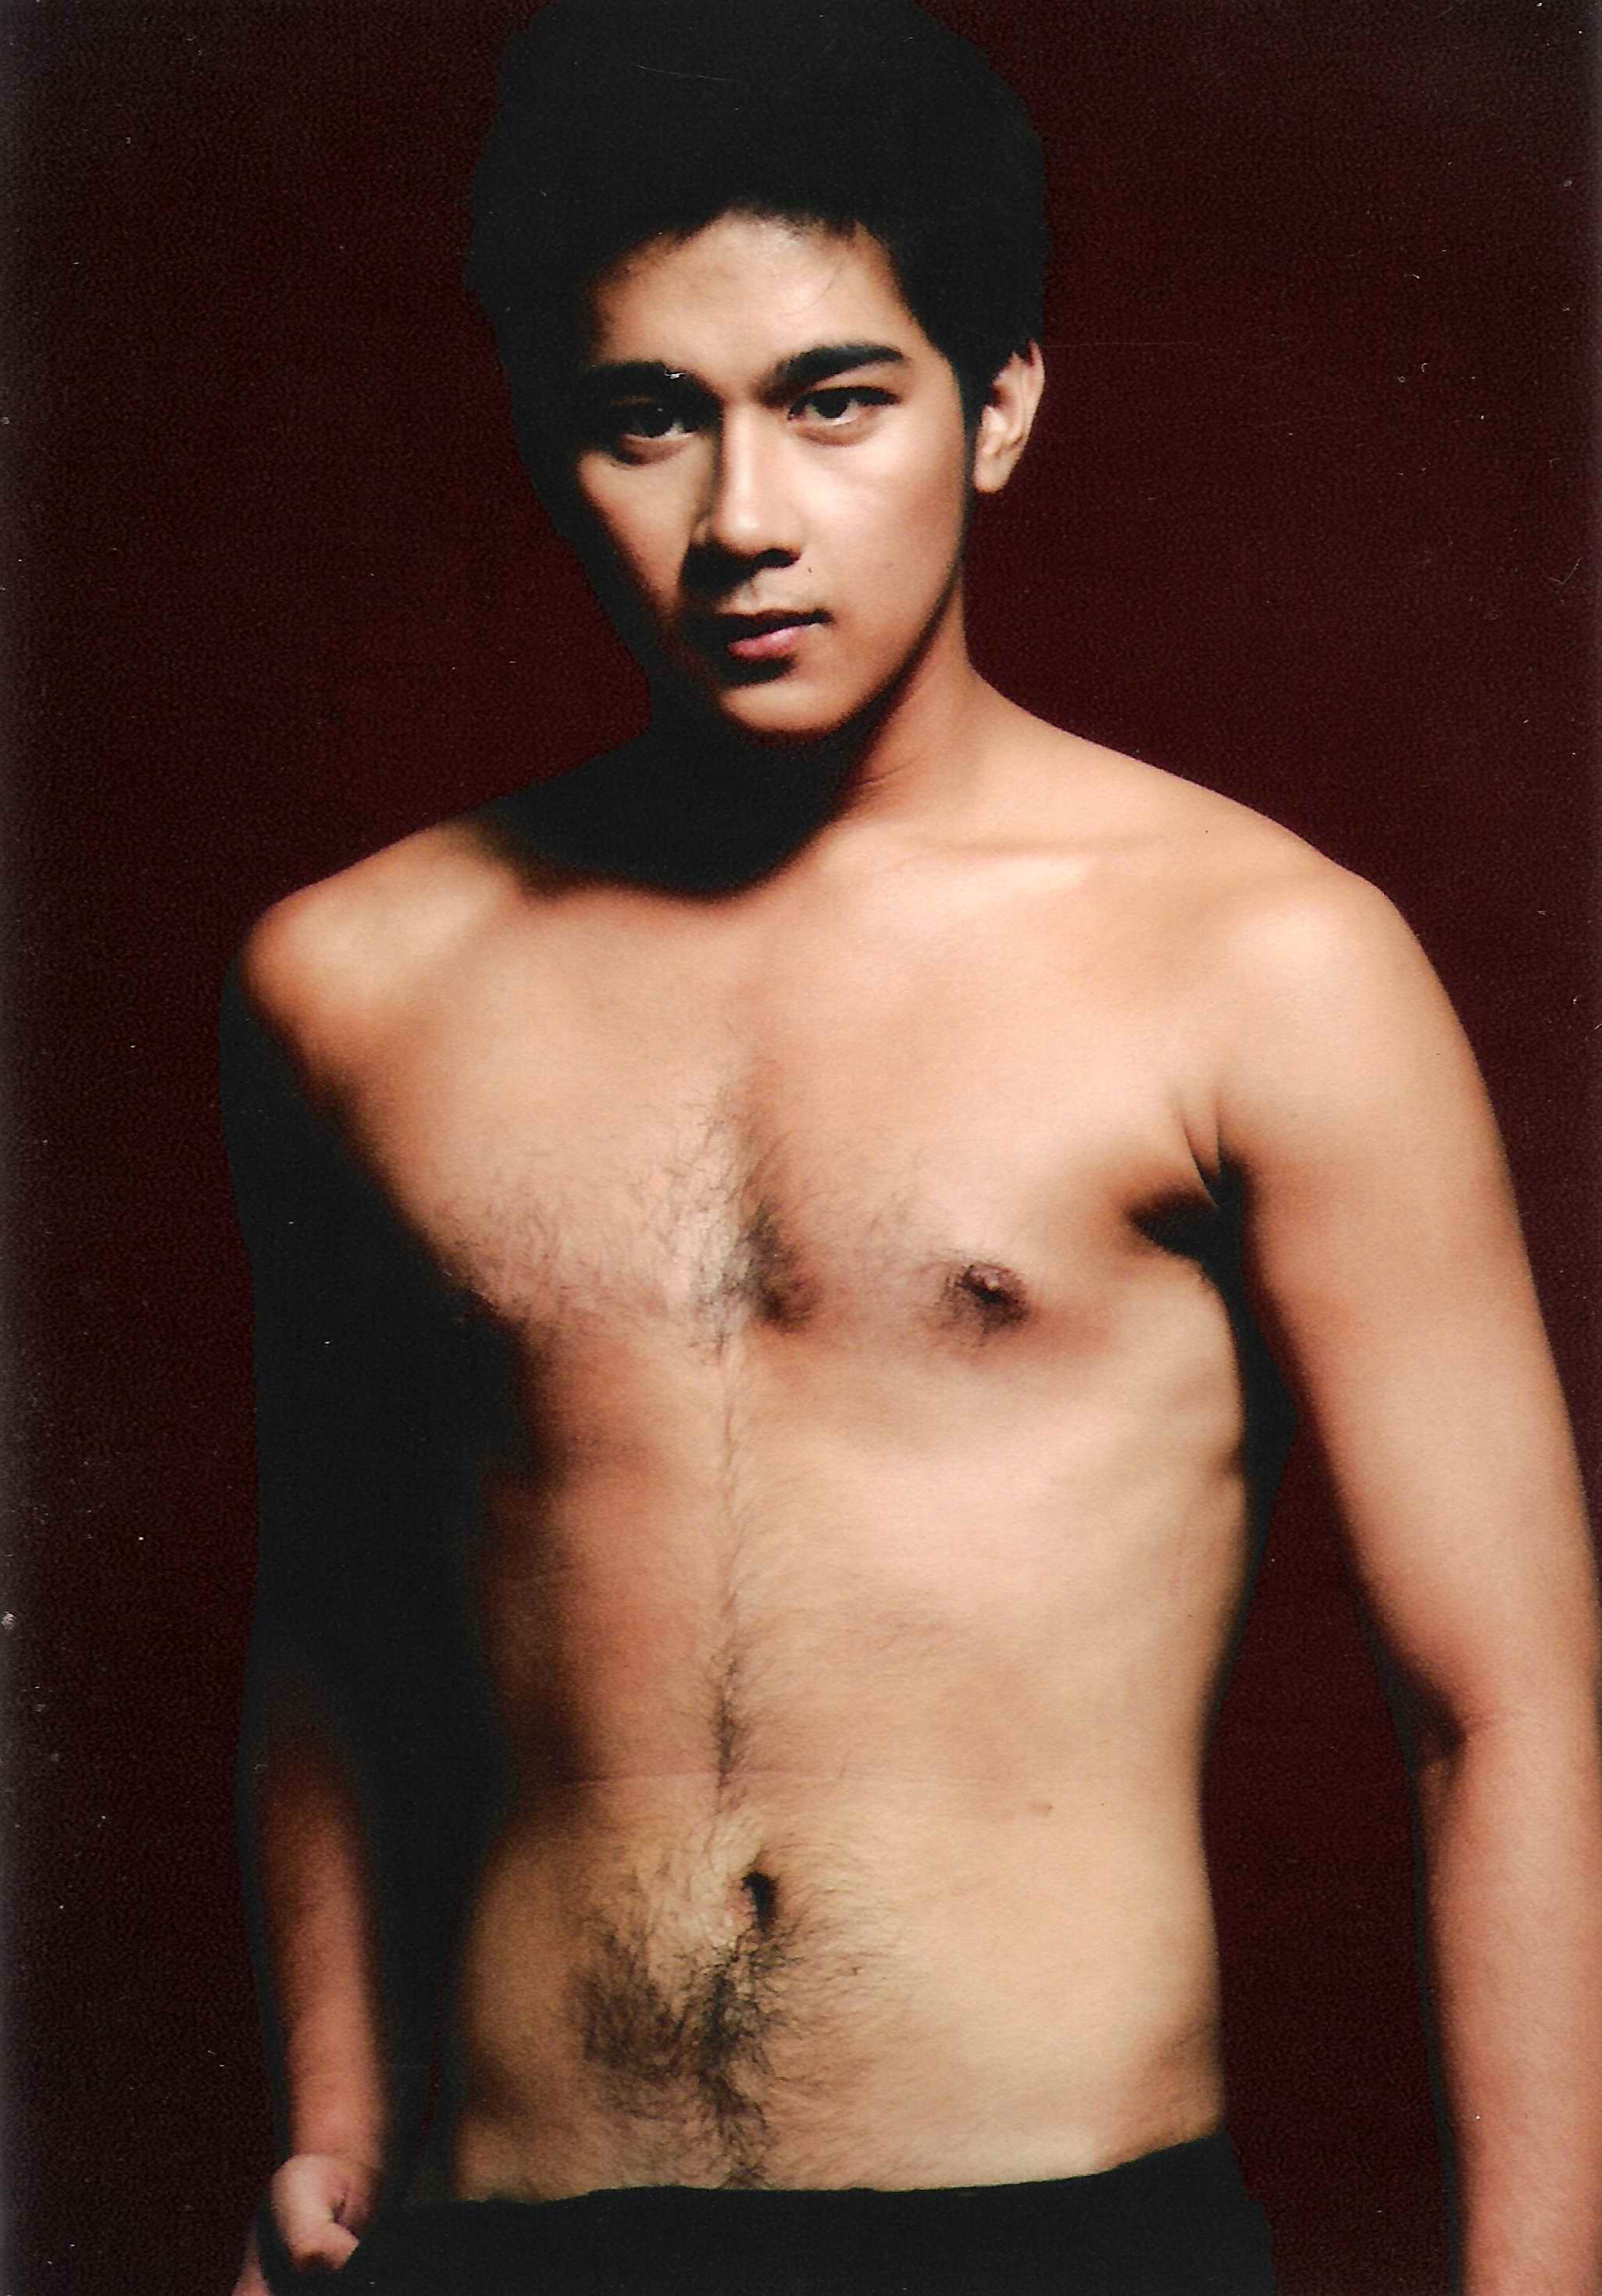 KEN ESCUDERO - Pinoy Actor, FRESH from the OVEN. 